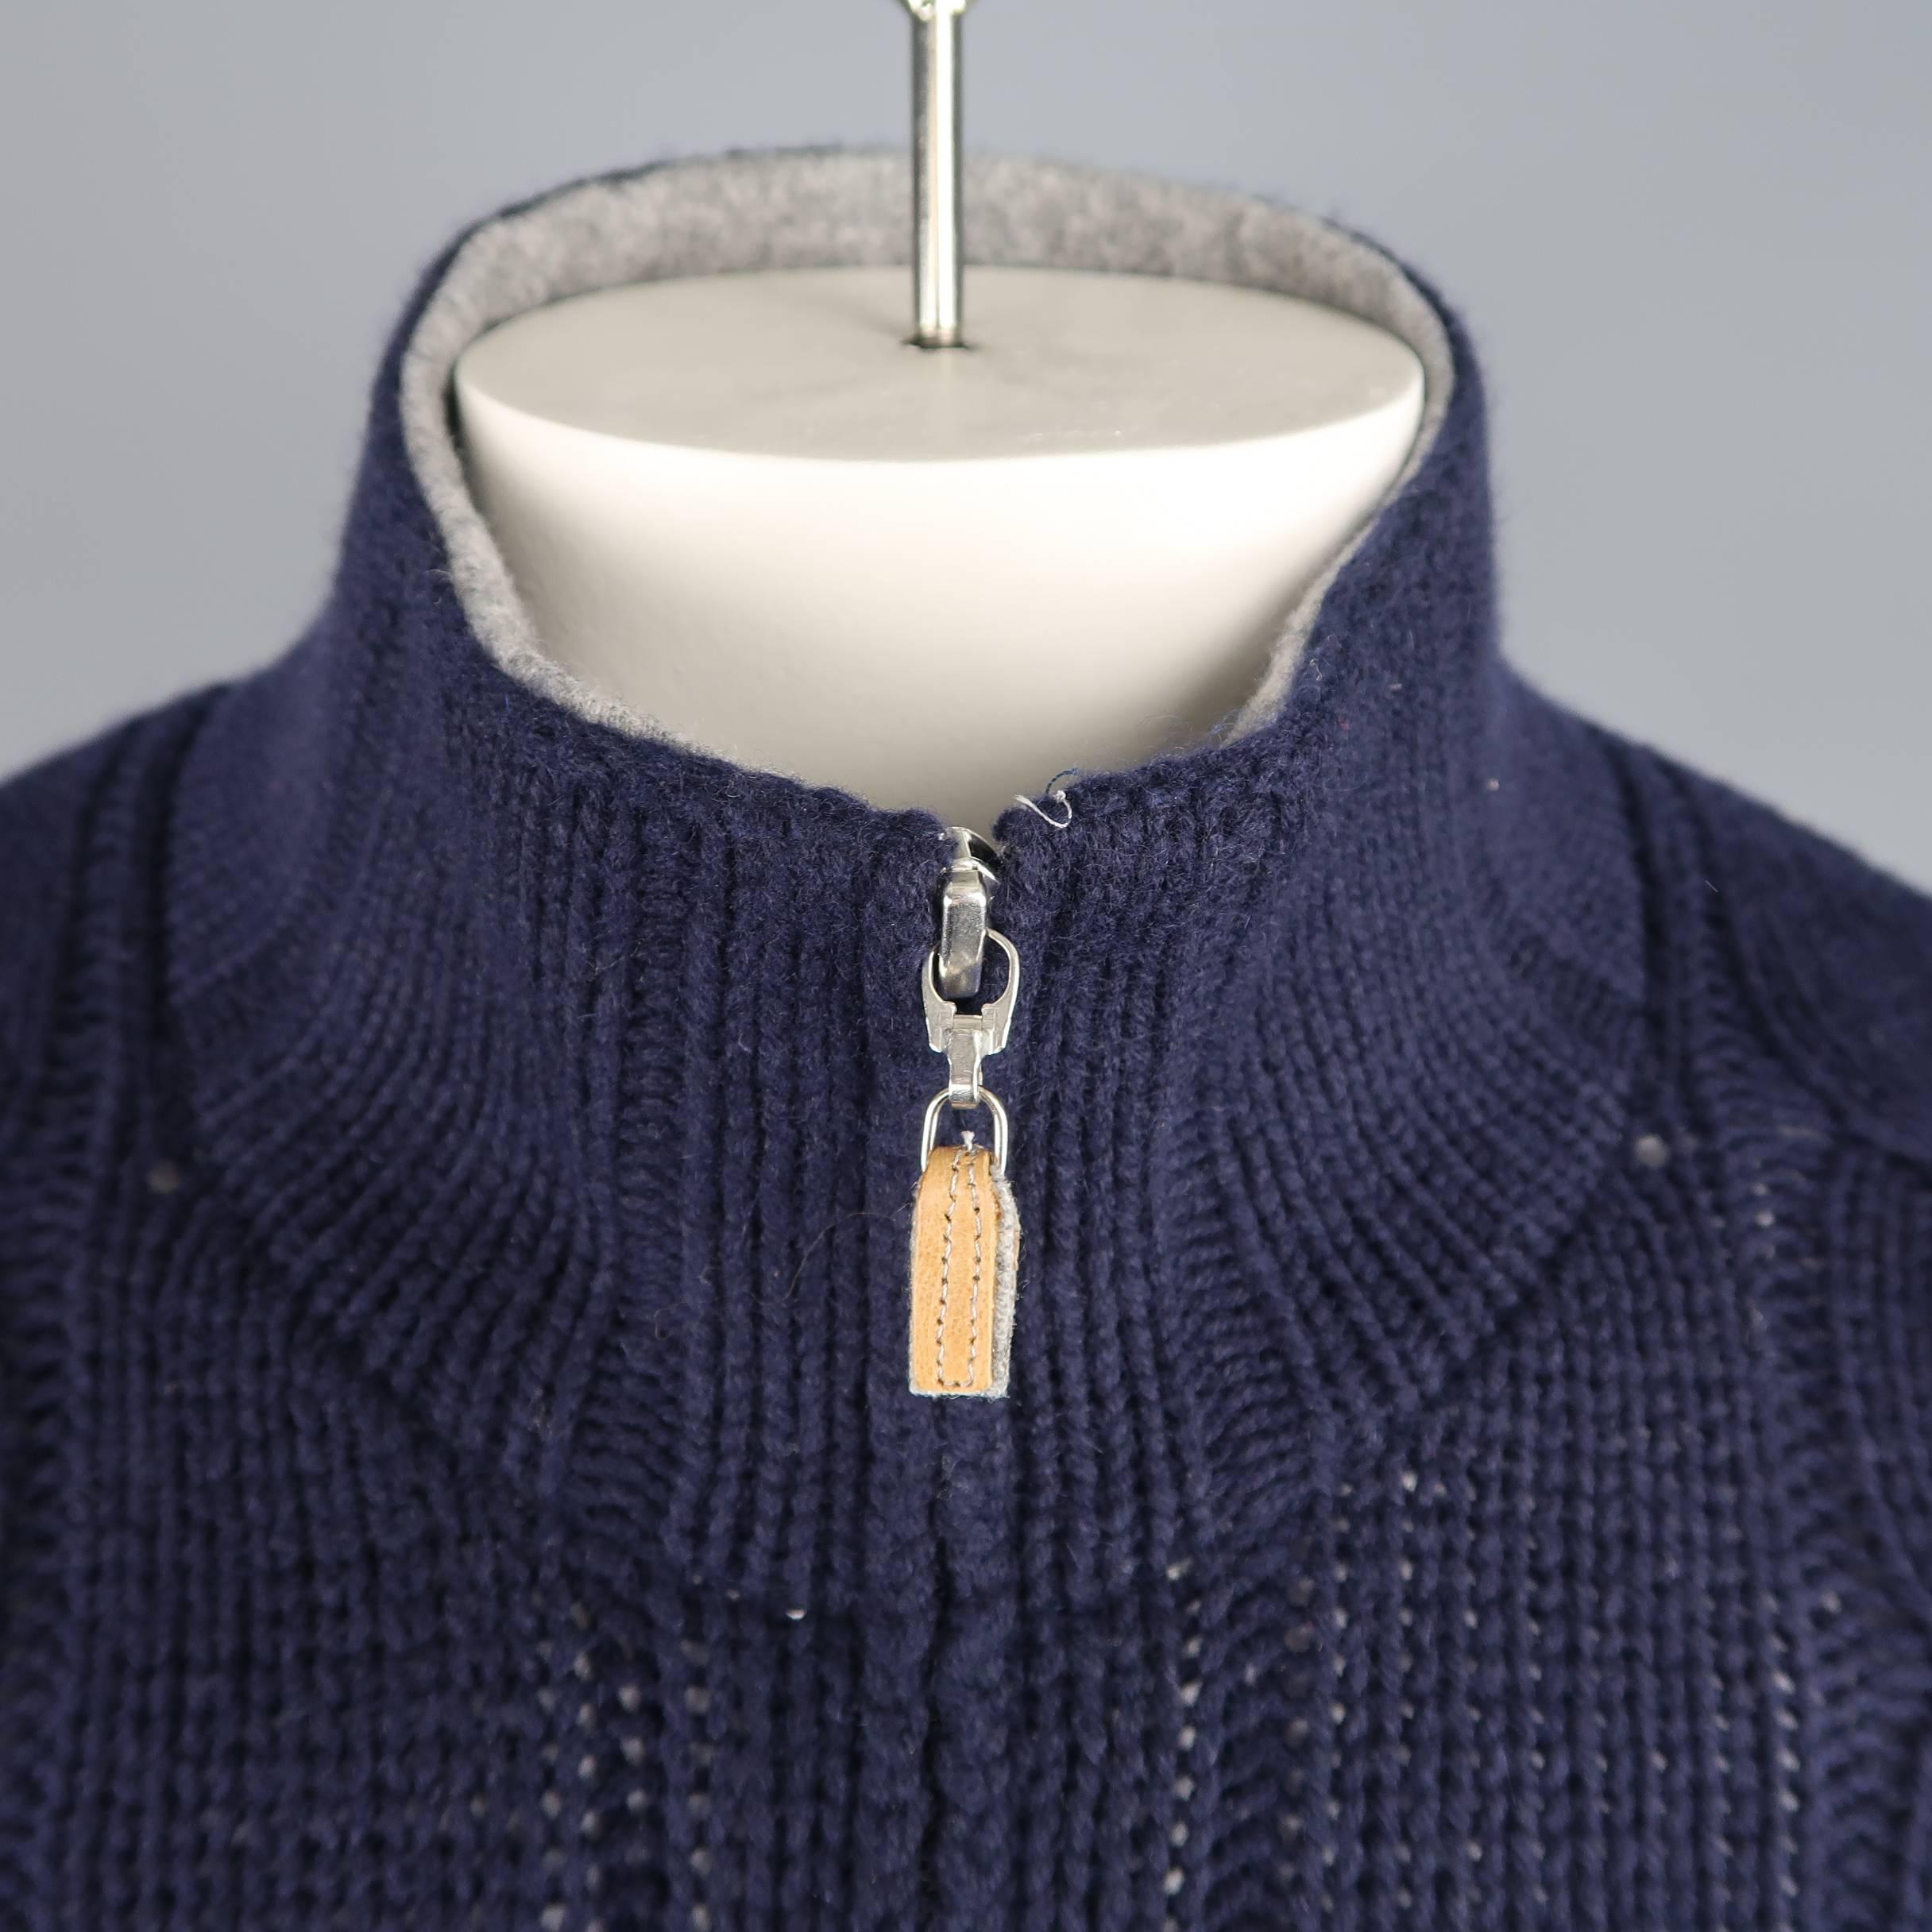 BRUNELLO CUCINELLI cardigan comes in wool, cashmere, and silk blend chunky cable knit with a high collar, hidden zip up front, and double zip pockets with tan leather tabs. Made in Italy.
 
Excellent Pre-Owned Condition.
Marked: IT 52
